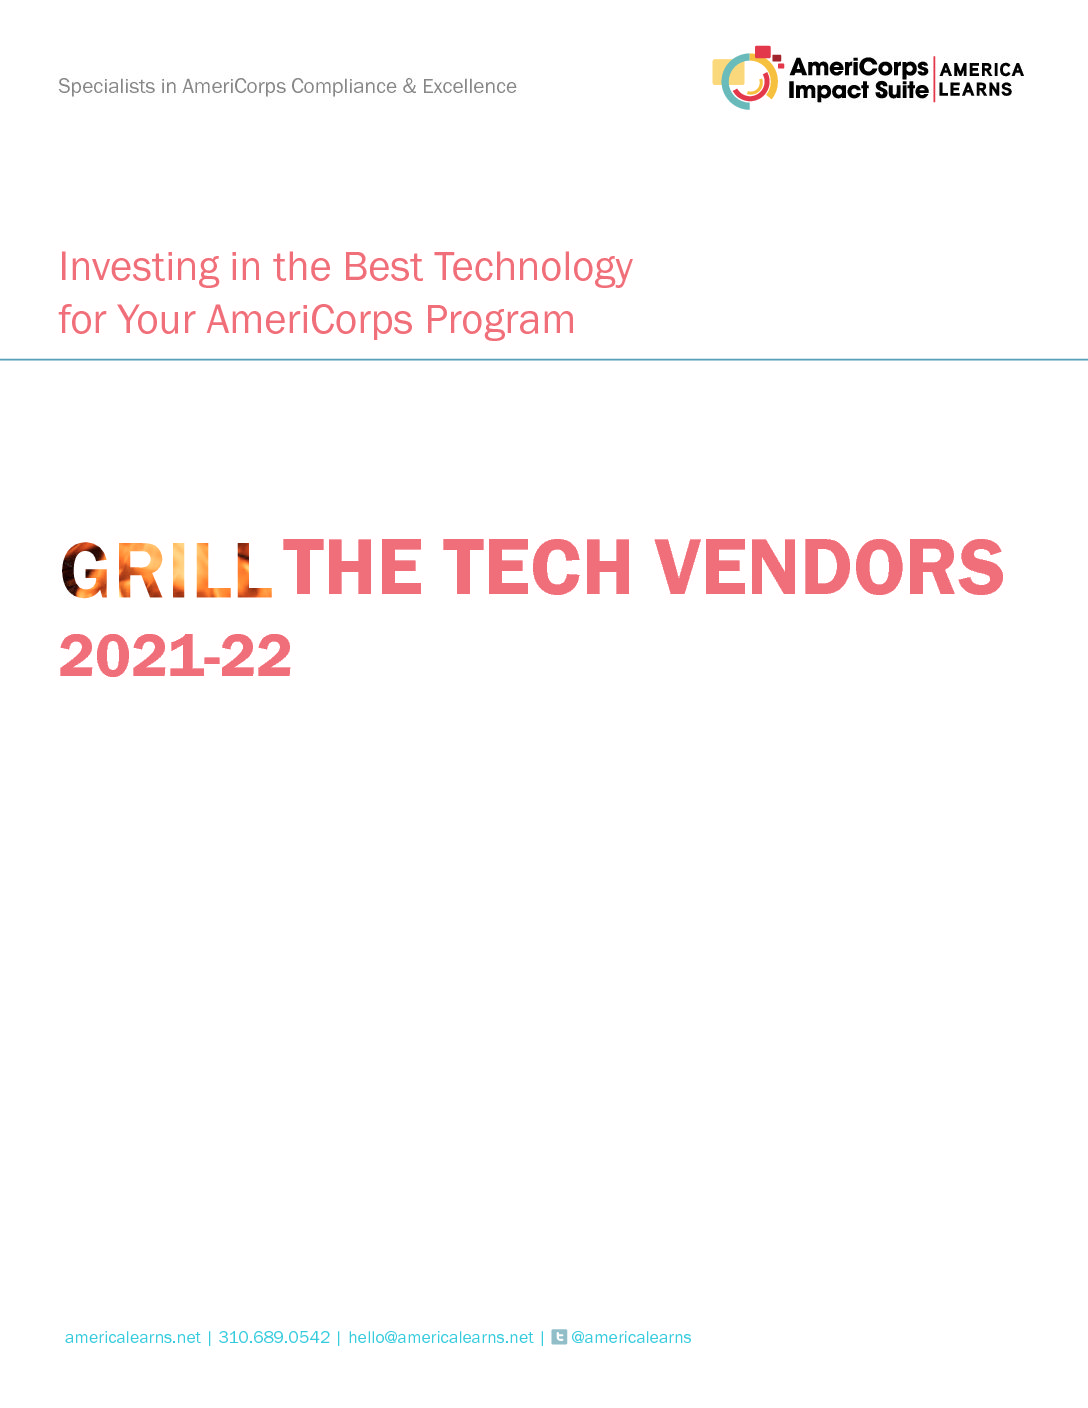 The 2021-22 “Grill the Tech Vendors” Guide for AmeriCorps is Here!